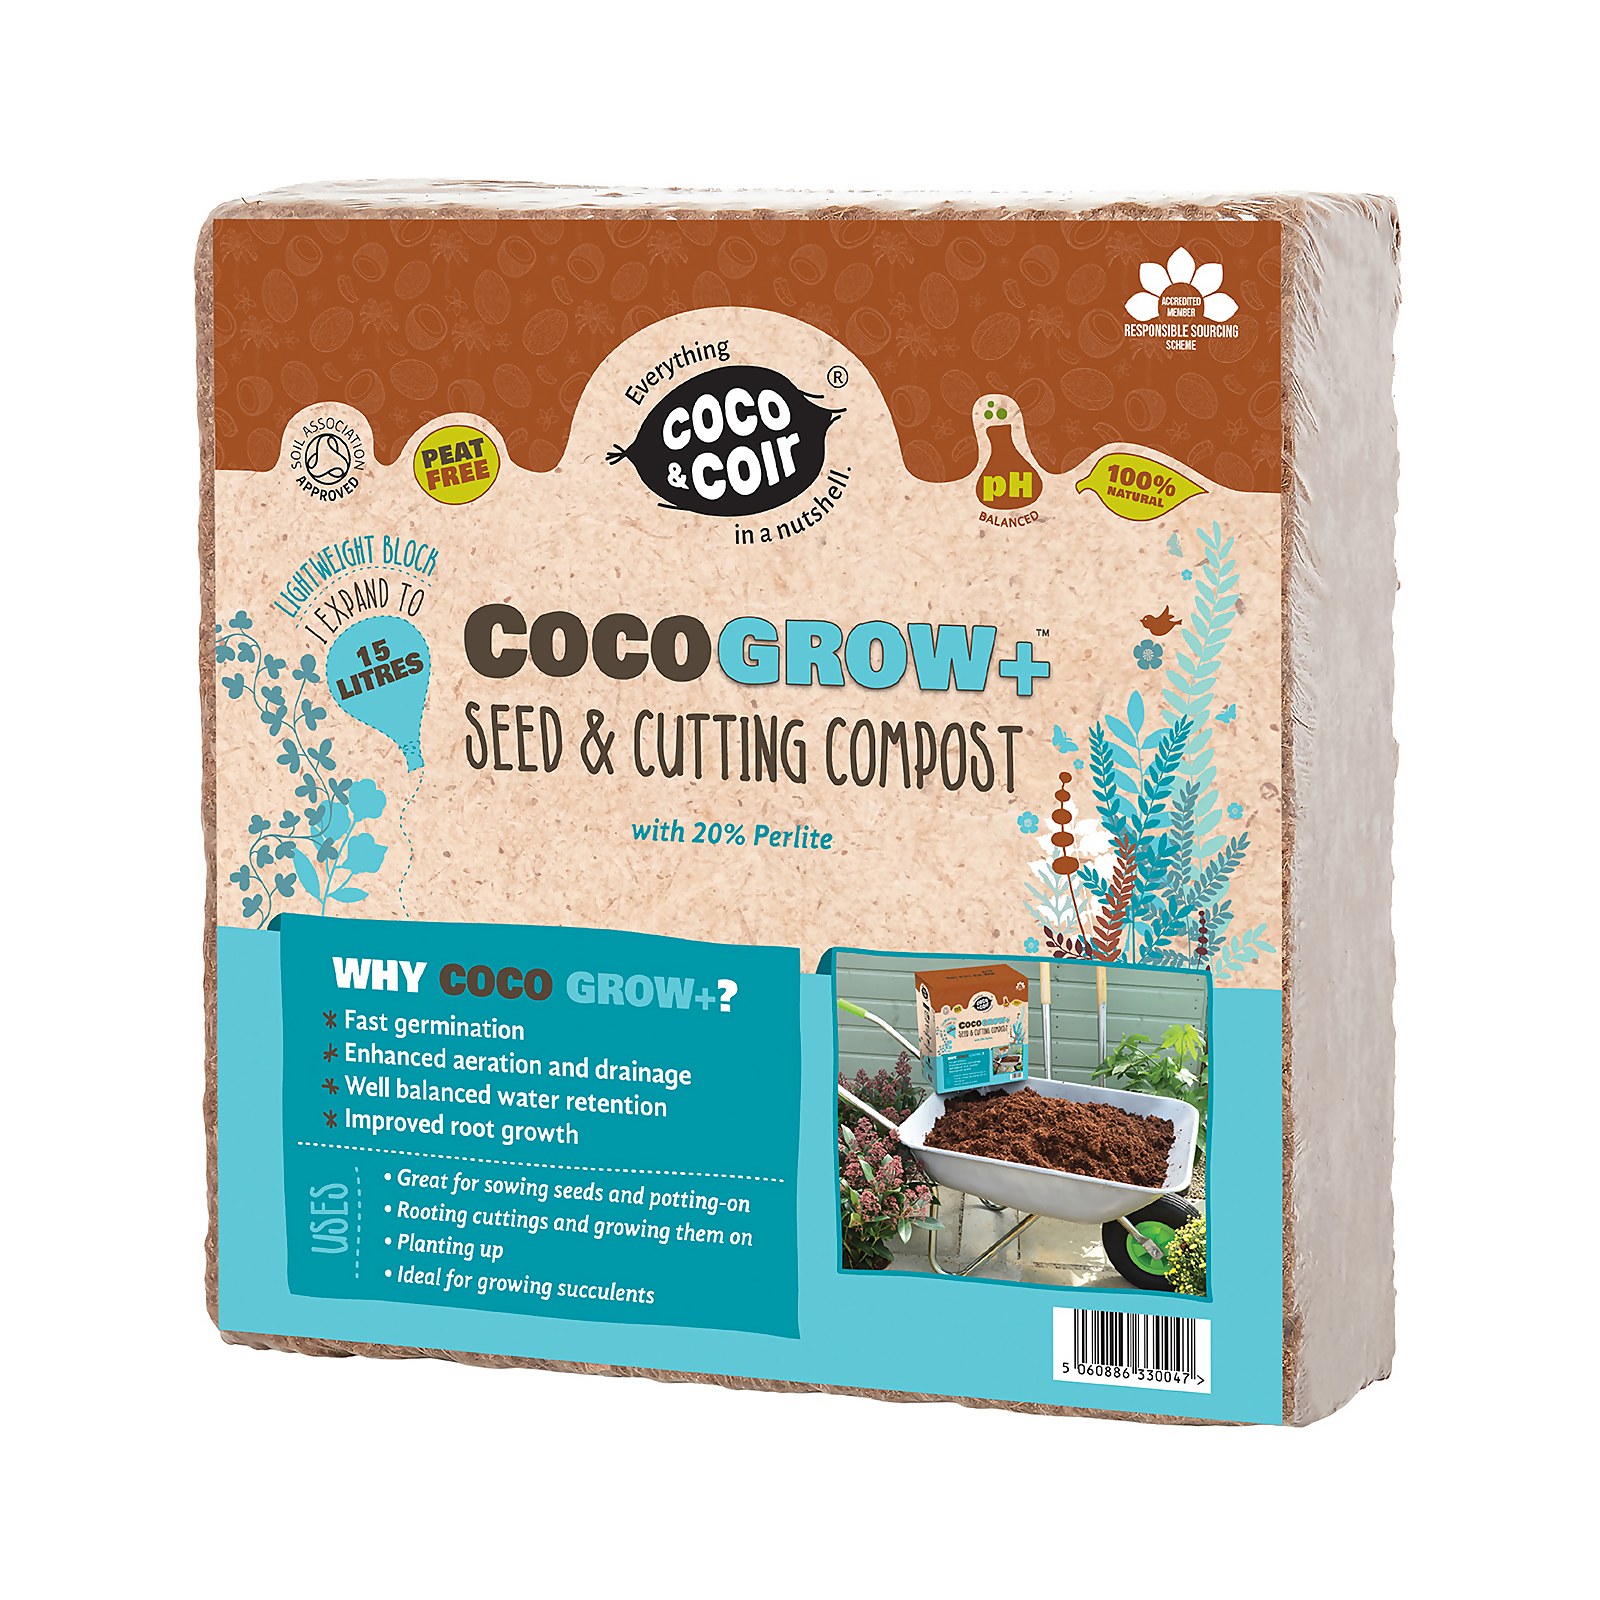 Photo of Coco & Coir Coco Grow+ Seed & Cutting Compost + 20 Perlite - 15l